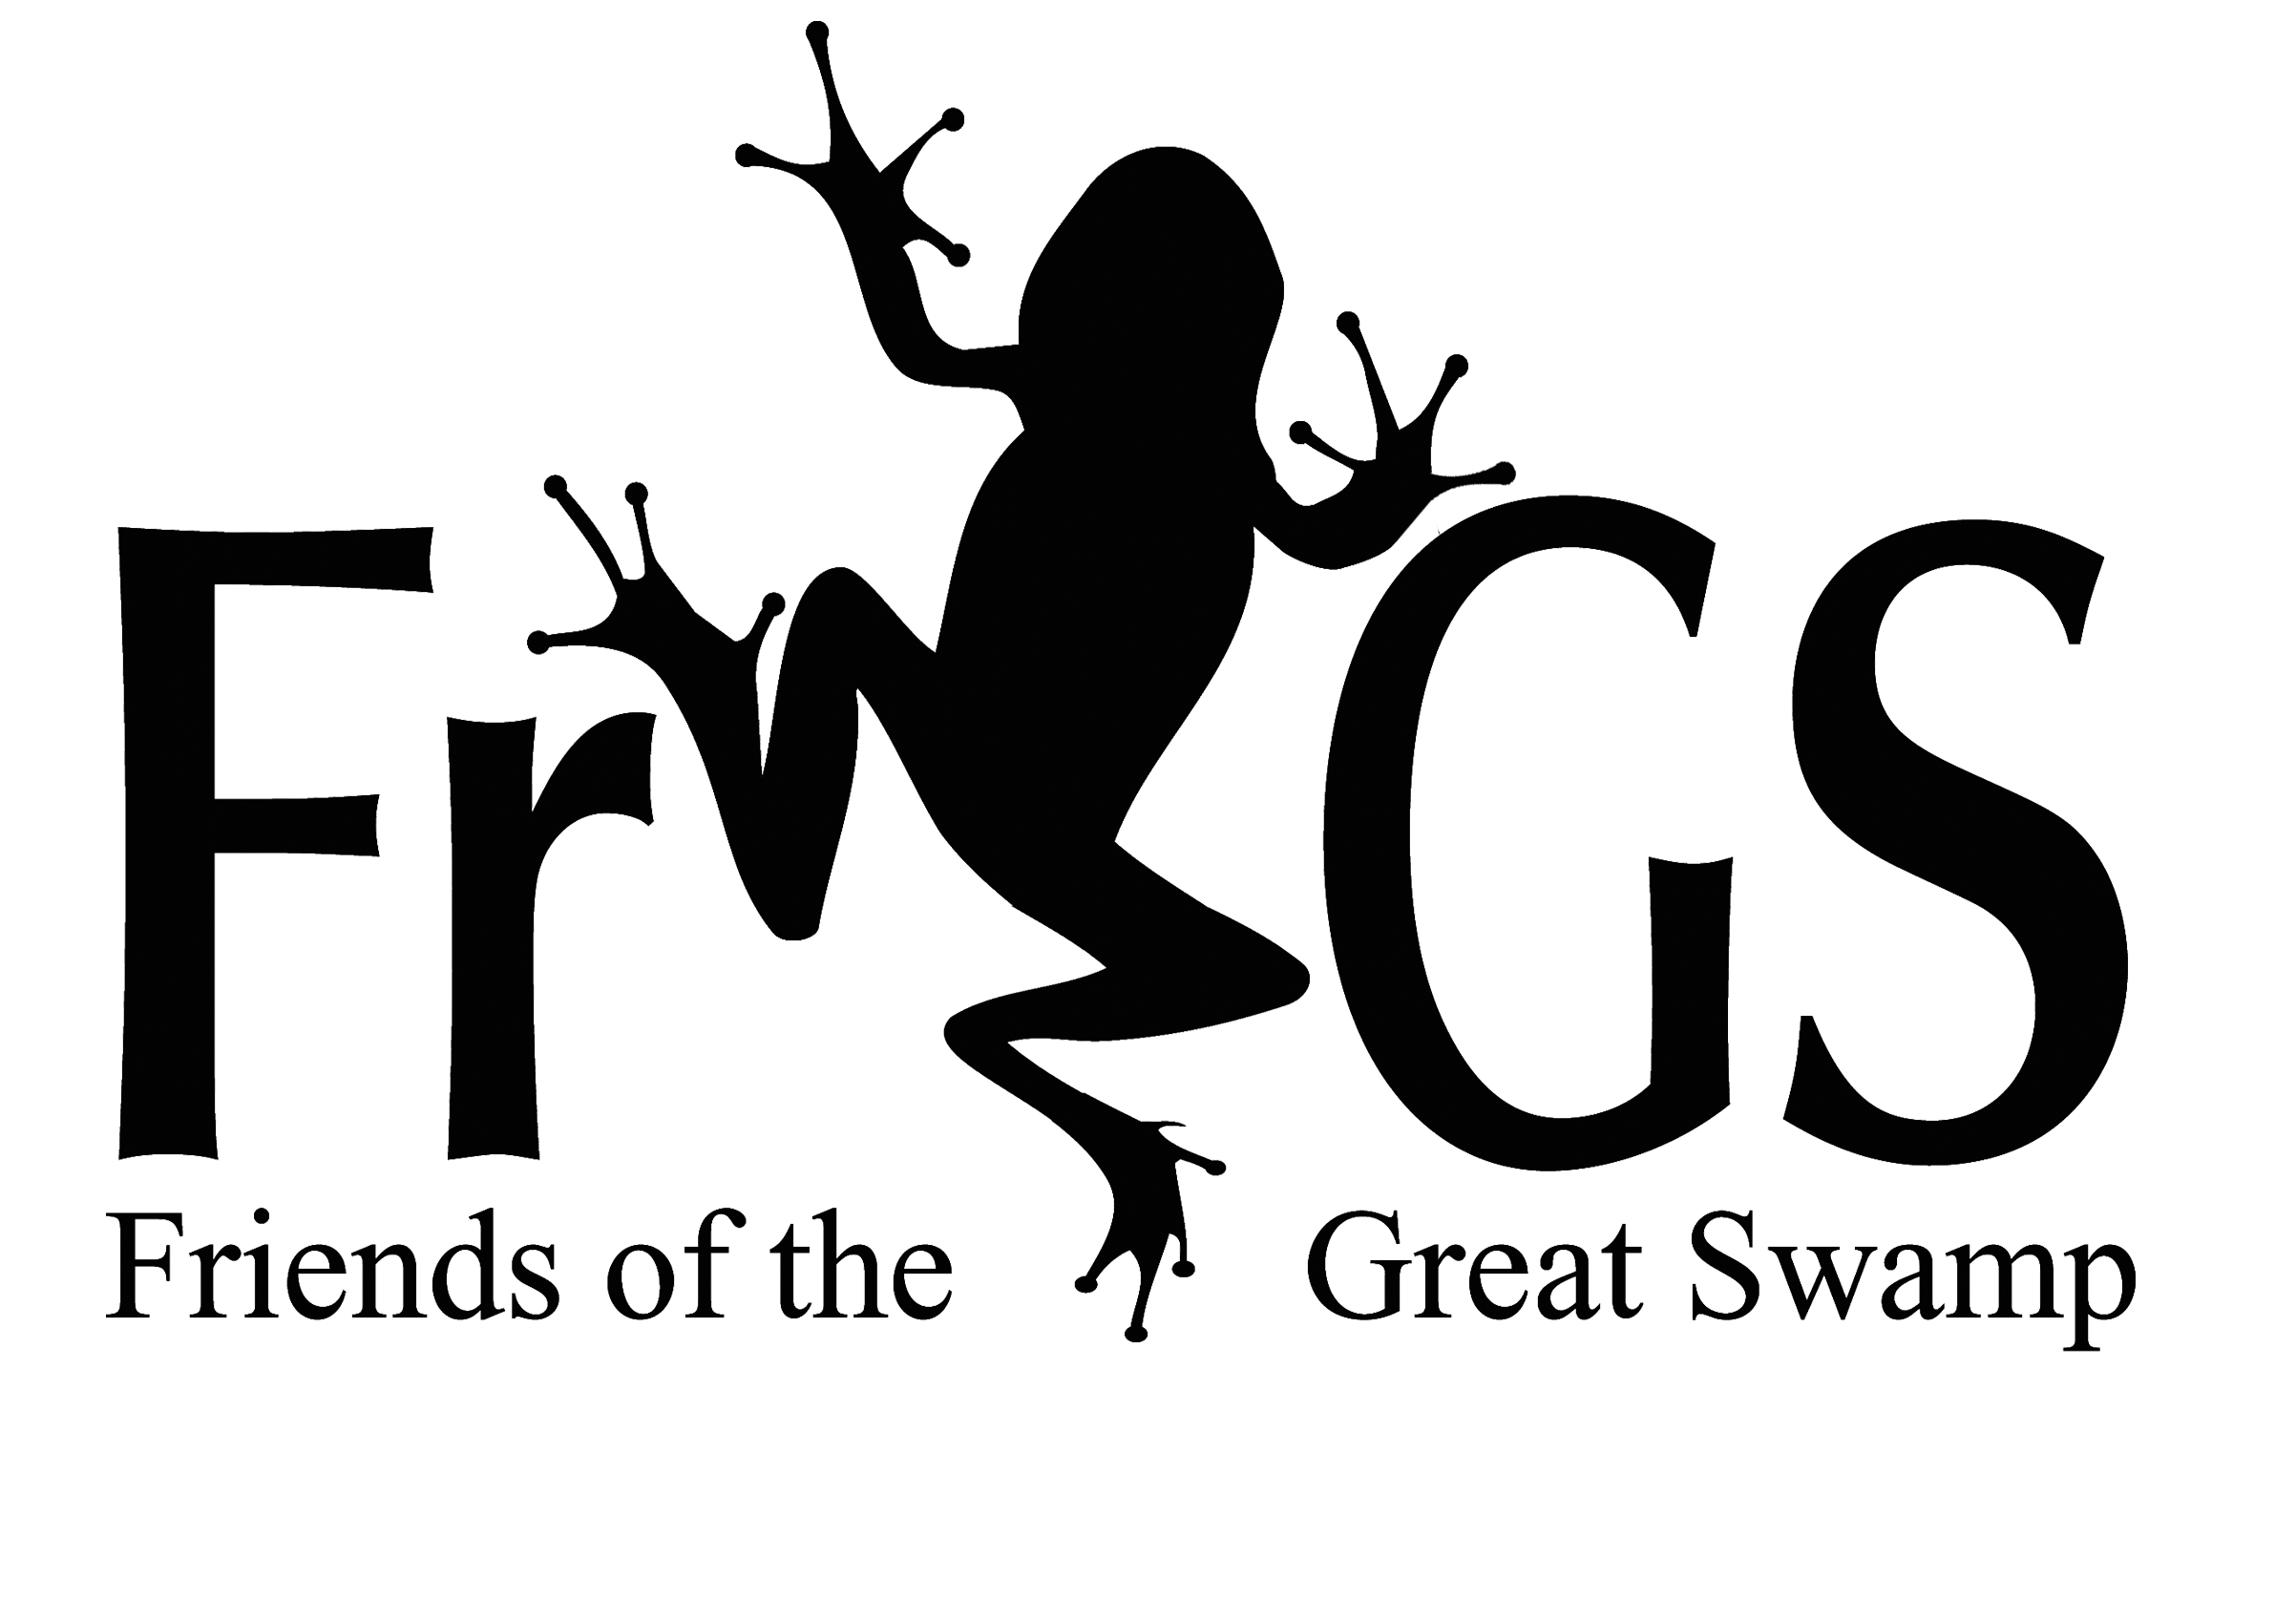 White and Black Frog Logo - Friends of the Great Swamp. The Great Swamp Watershed of Putnam